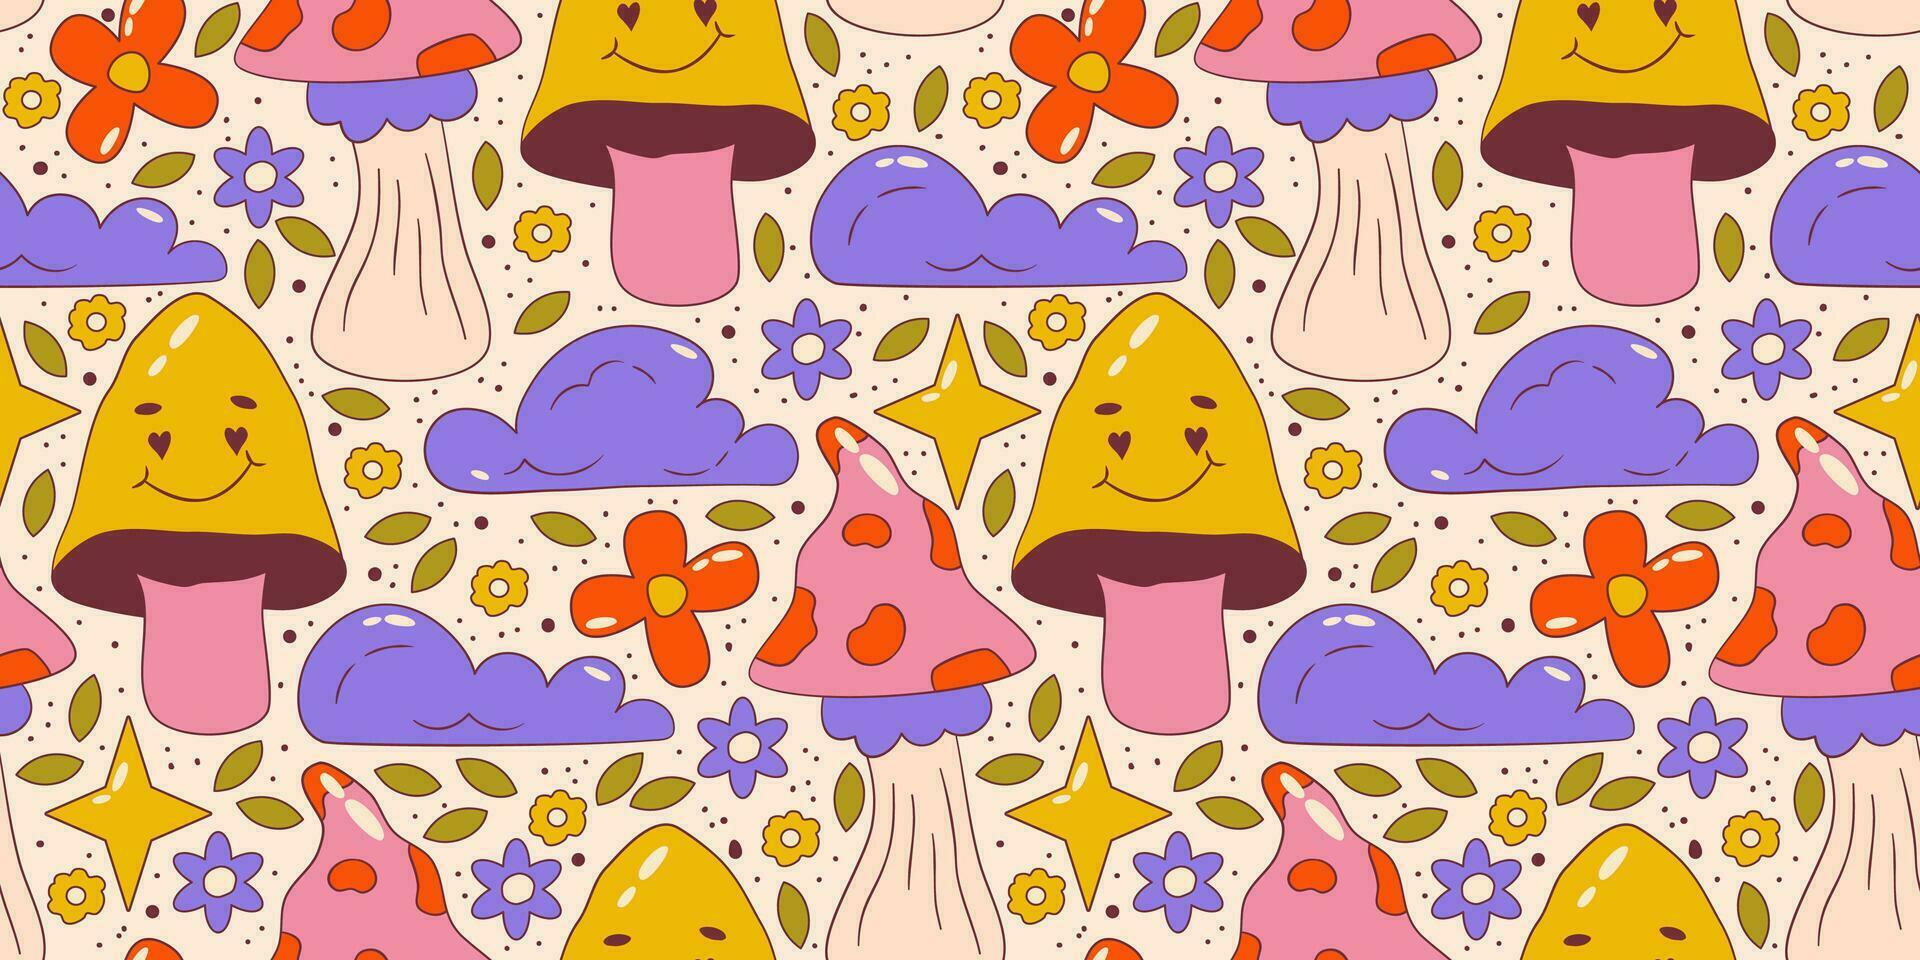 Trippy groovy flower seamless pattern. Retro groovy floral pattern with mushroom and cloud. Psychedelic cartoon design. Summer seamless background. Vector illustration